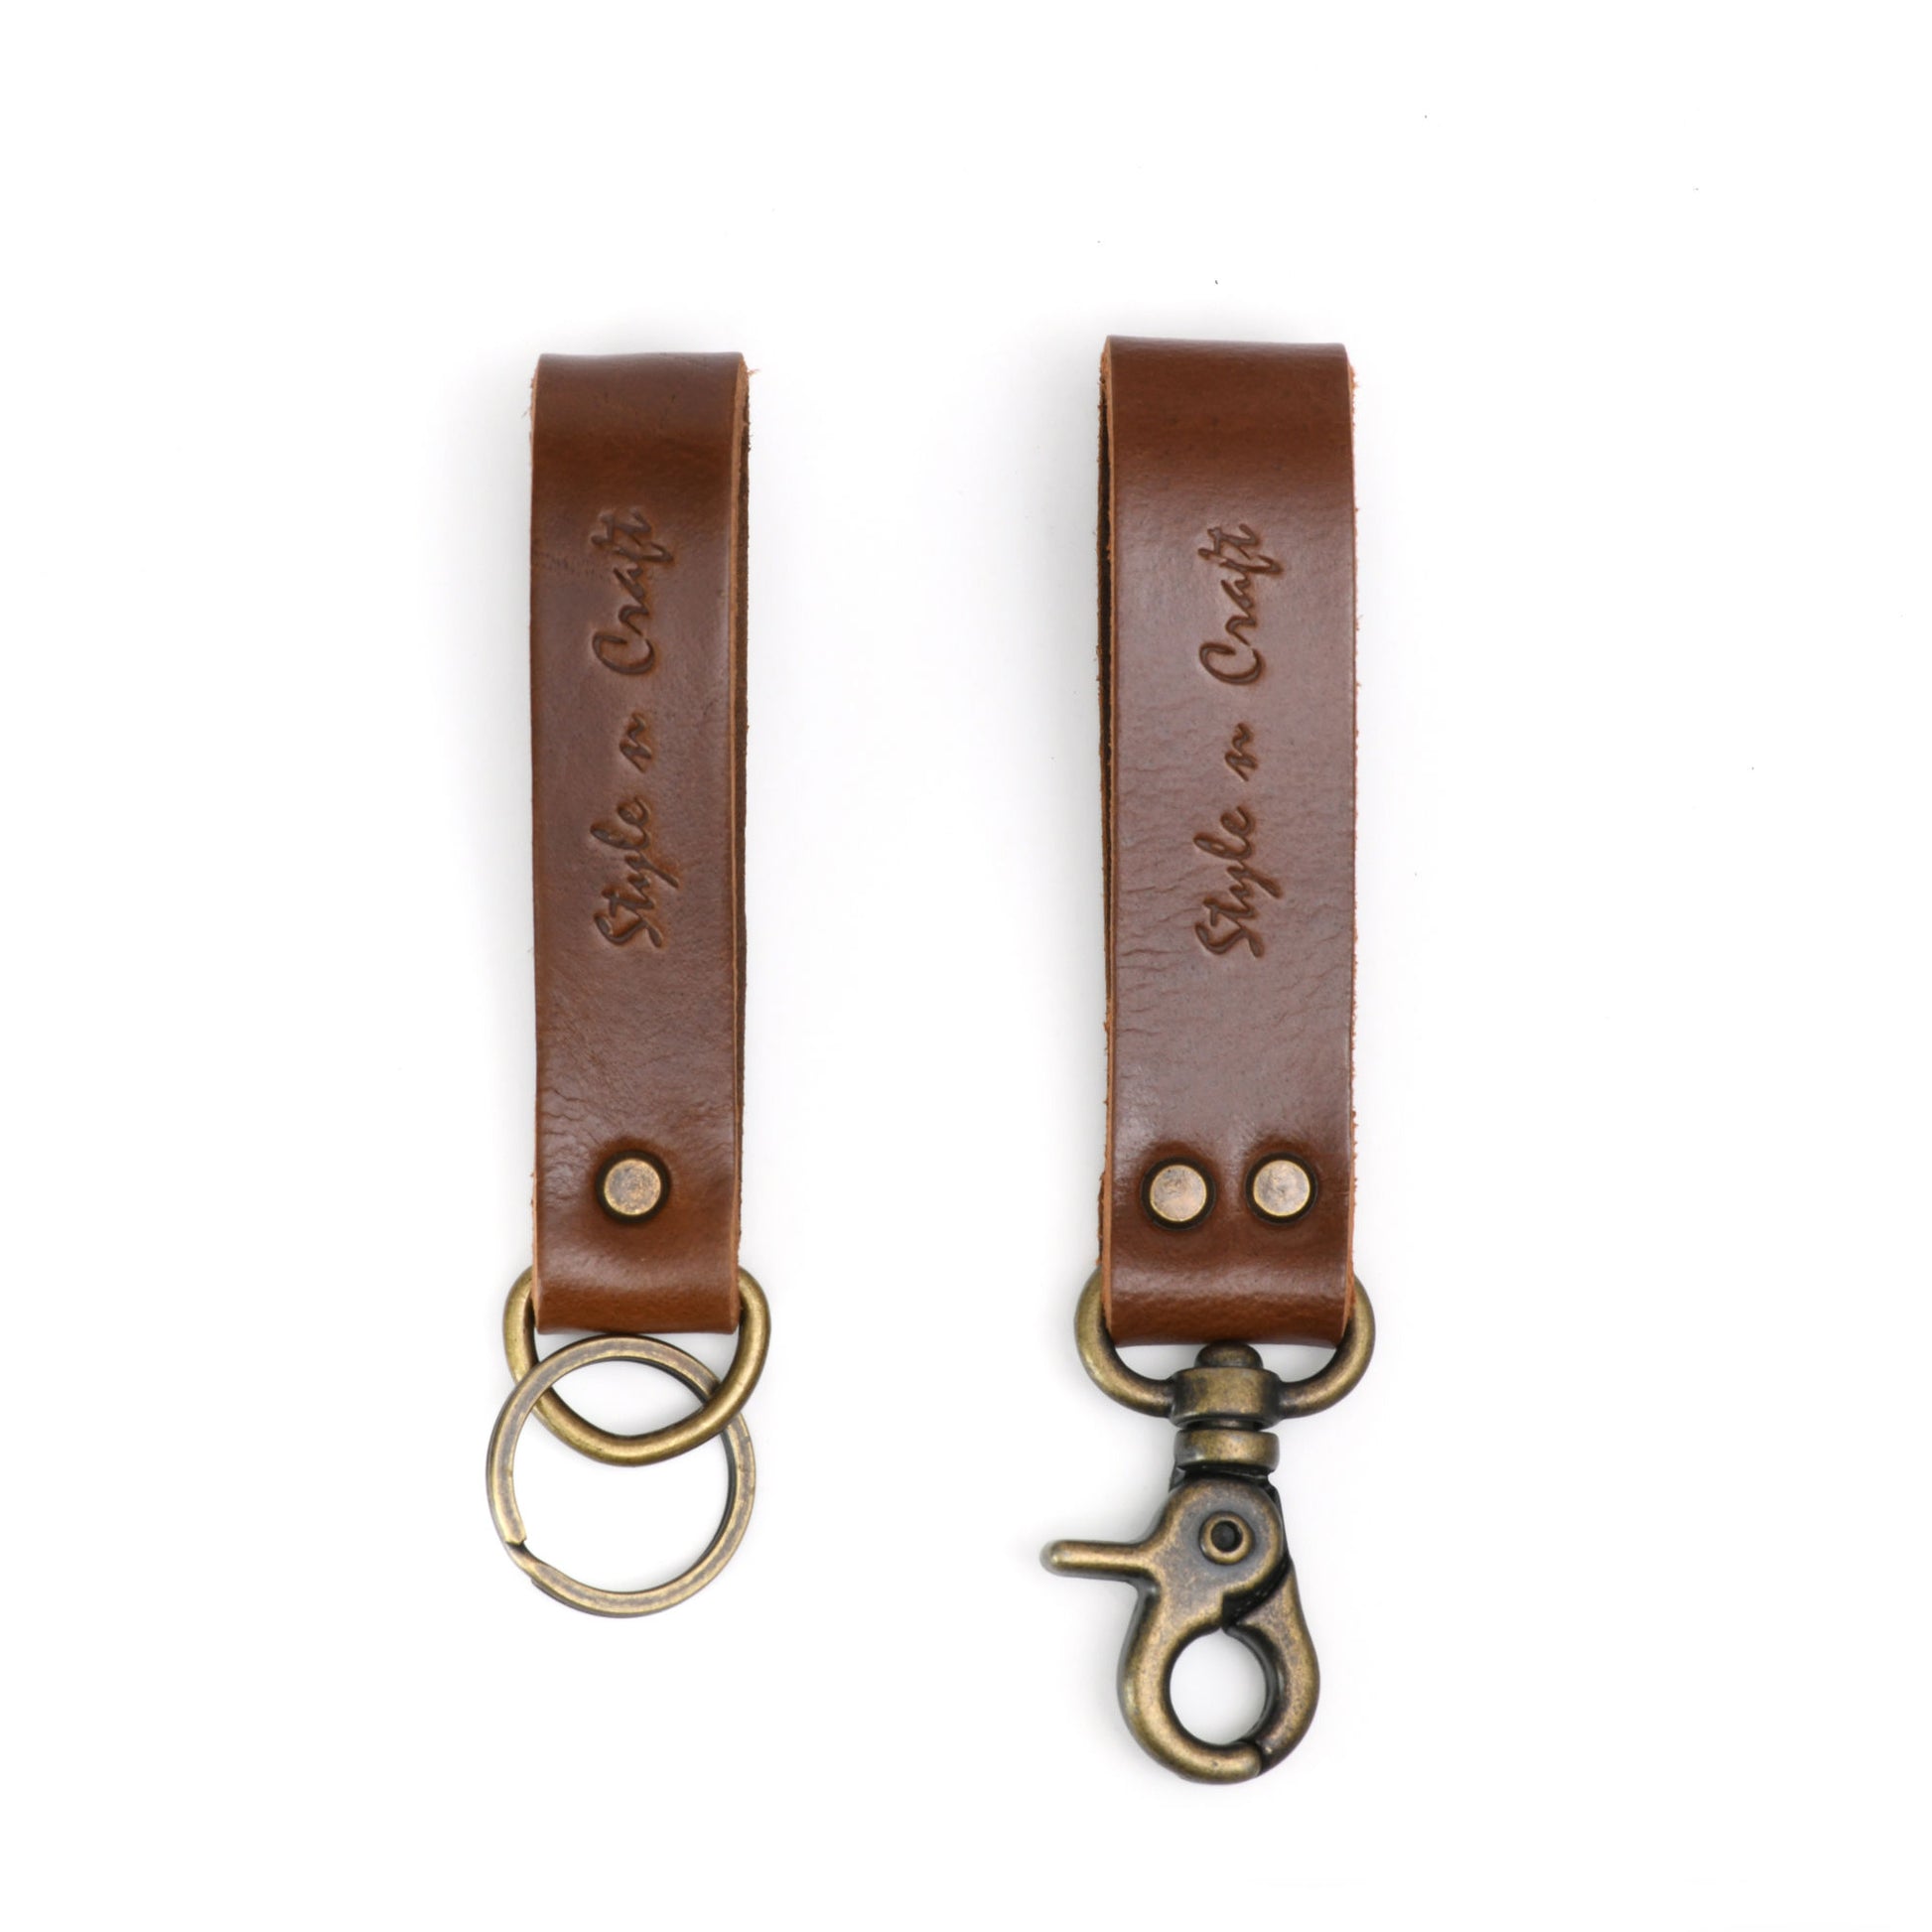 Style n Craft 98203 - Snap Loop & Key Ring Combination in Heavy Top Grain Leather in Dark Tan Color. Both Can Easily Slide on a 2 Inch Wide Belt. Front View